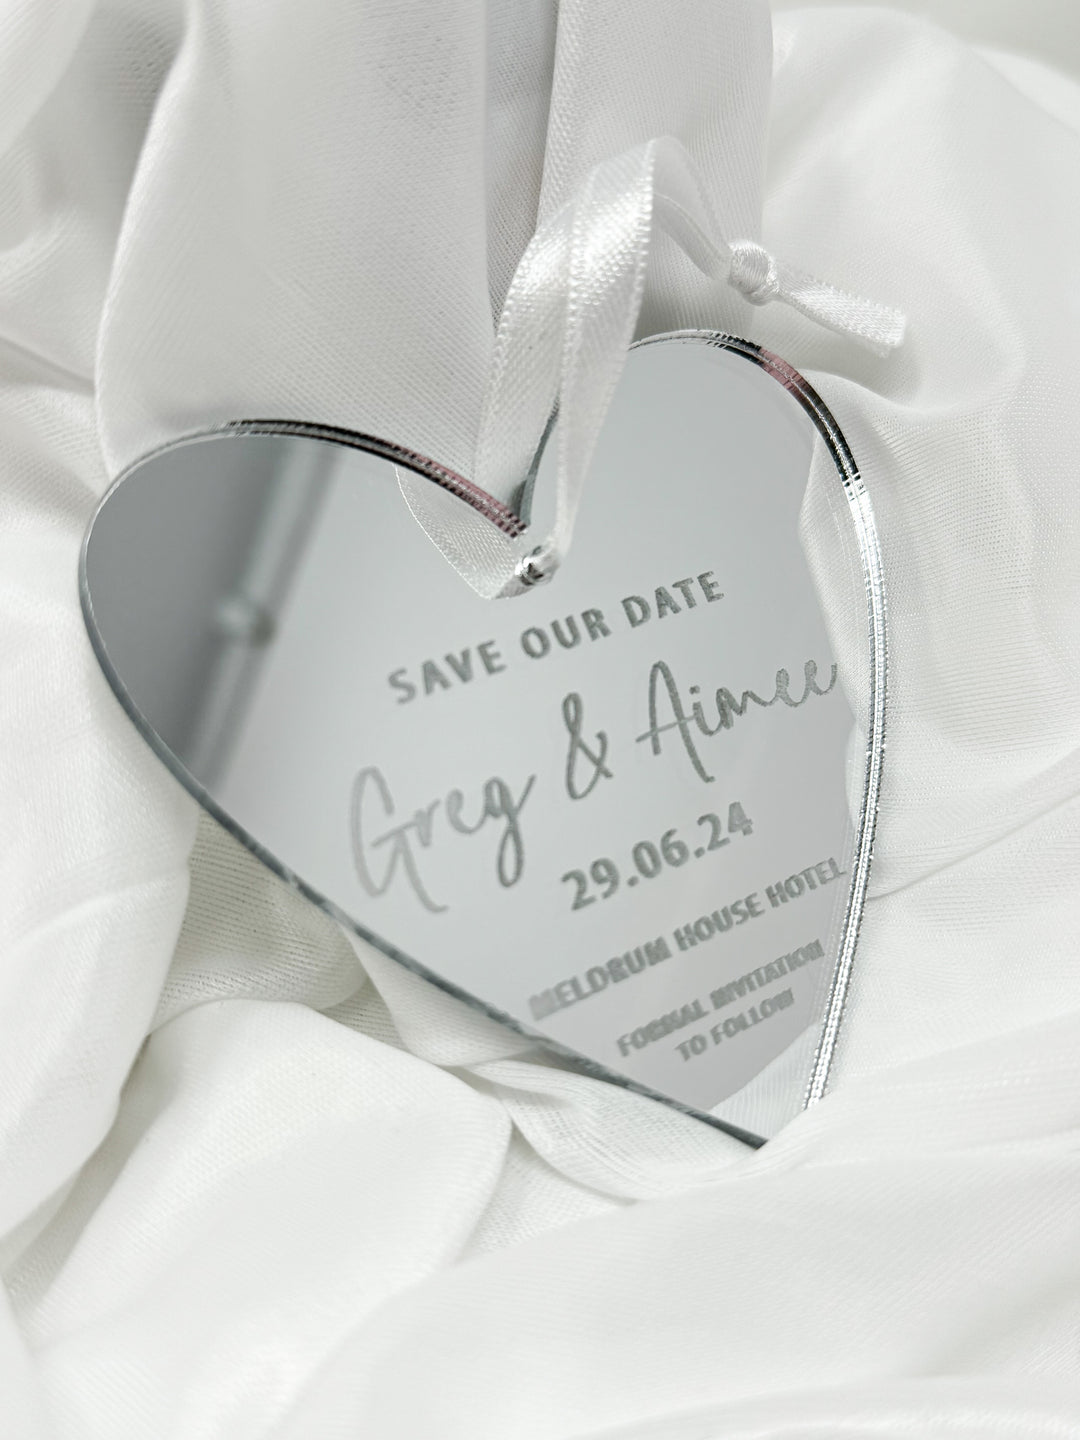 Save Our Date - Heart - Mirrored Acrylic - Style 1